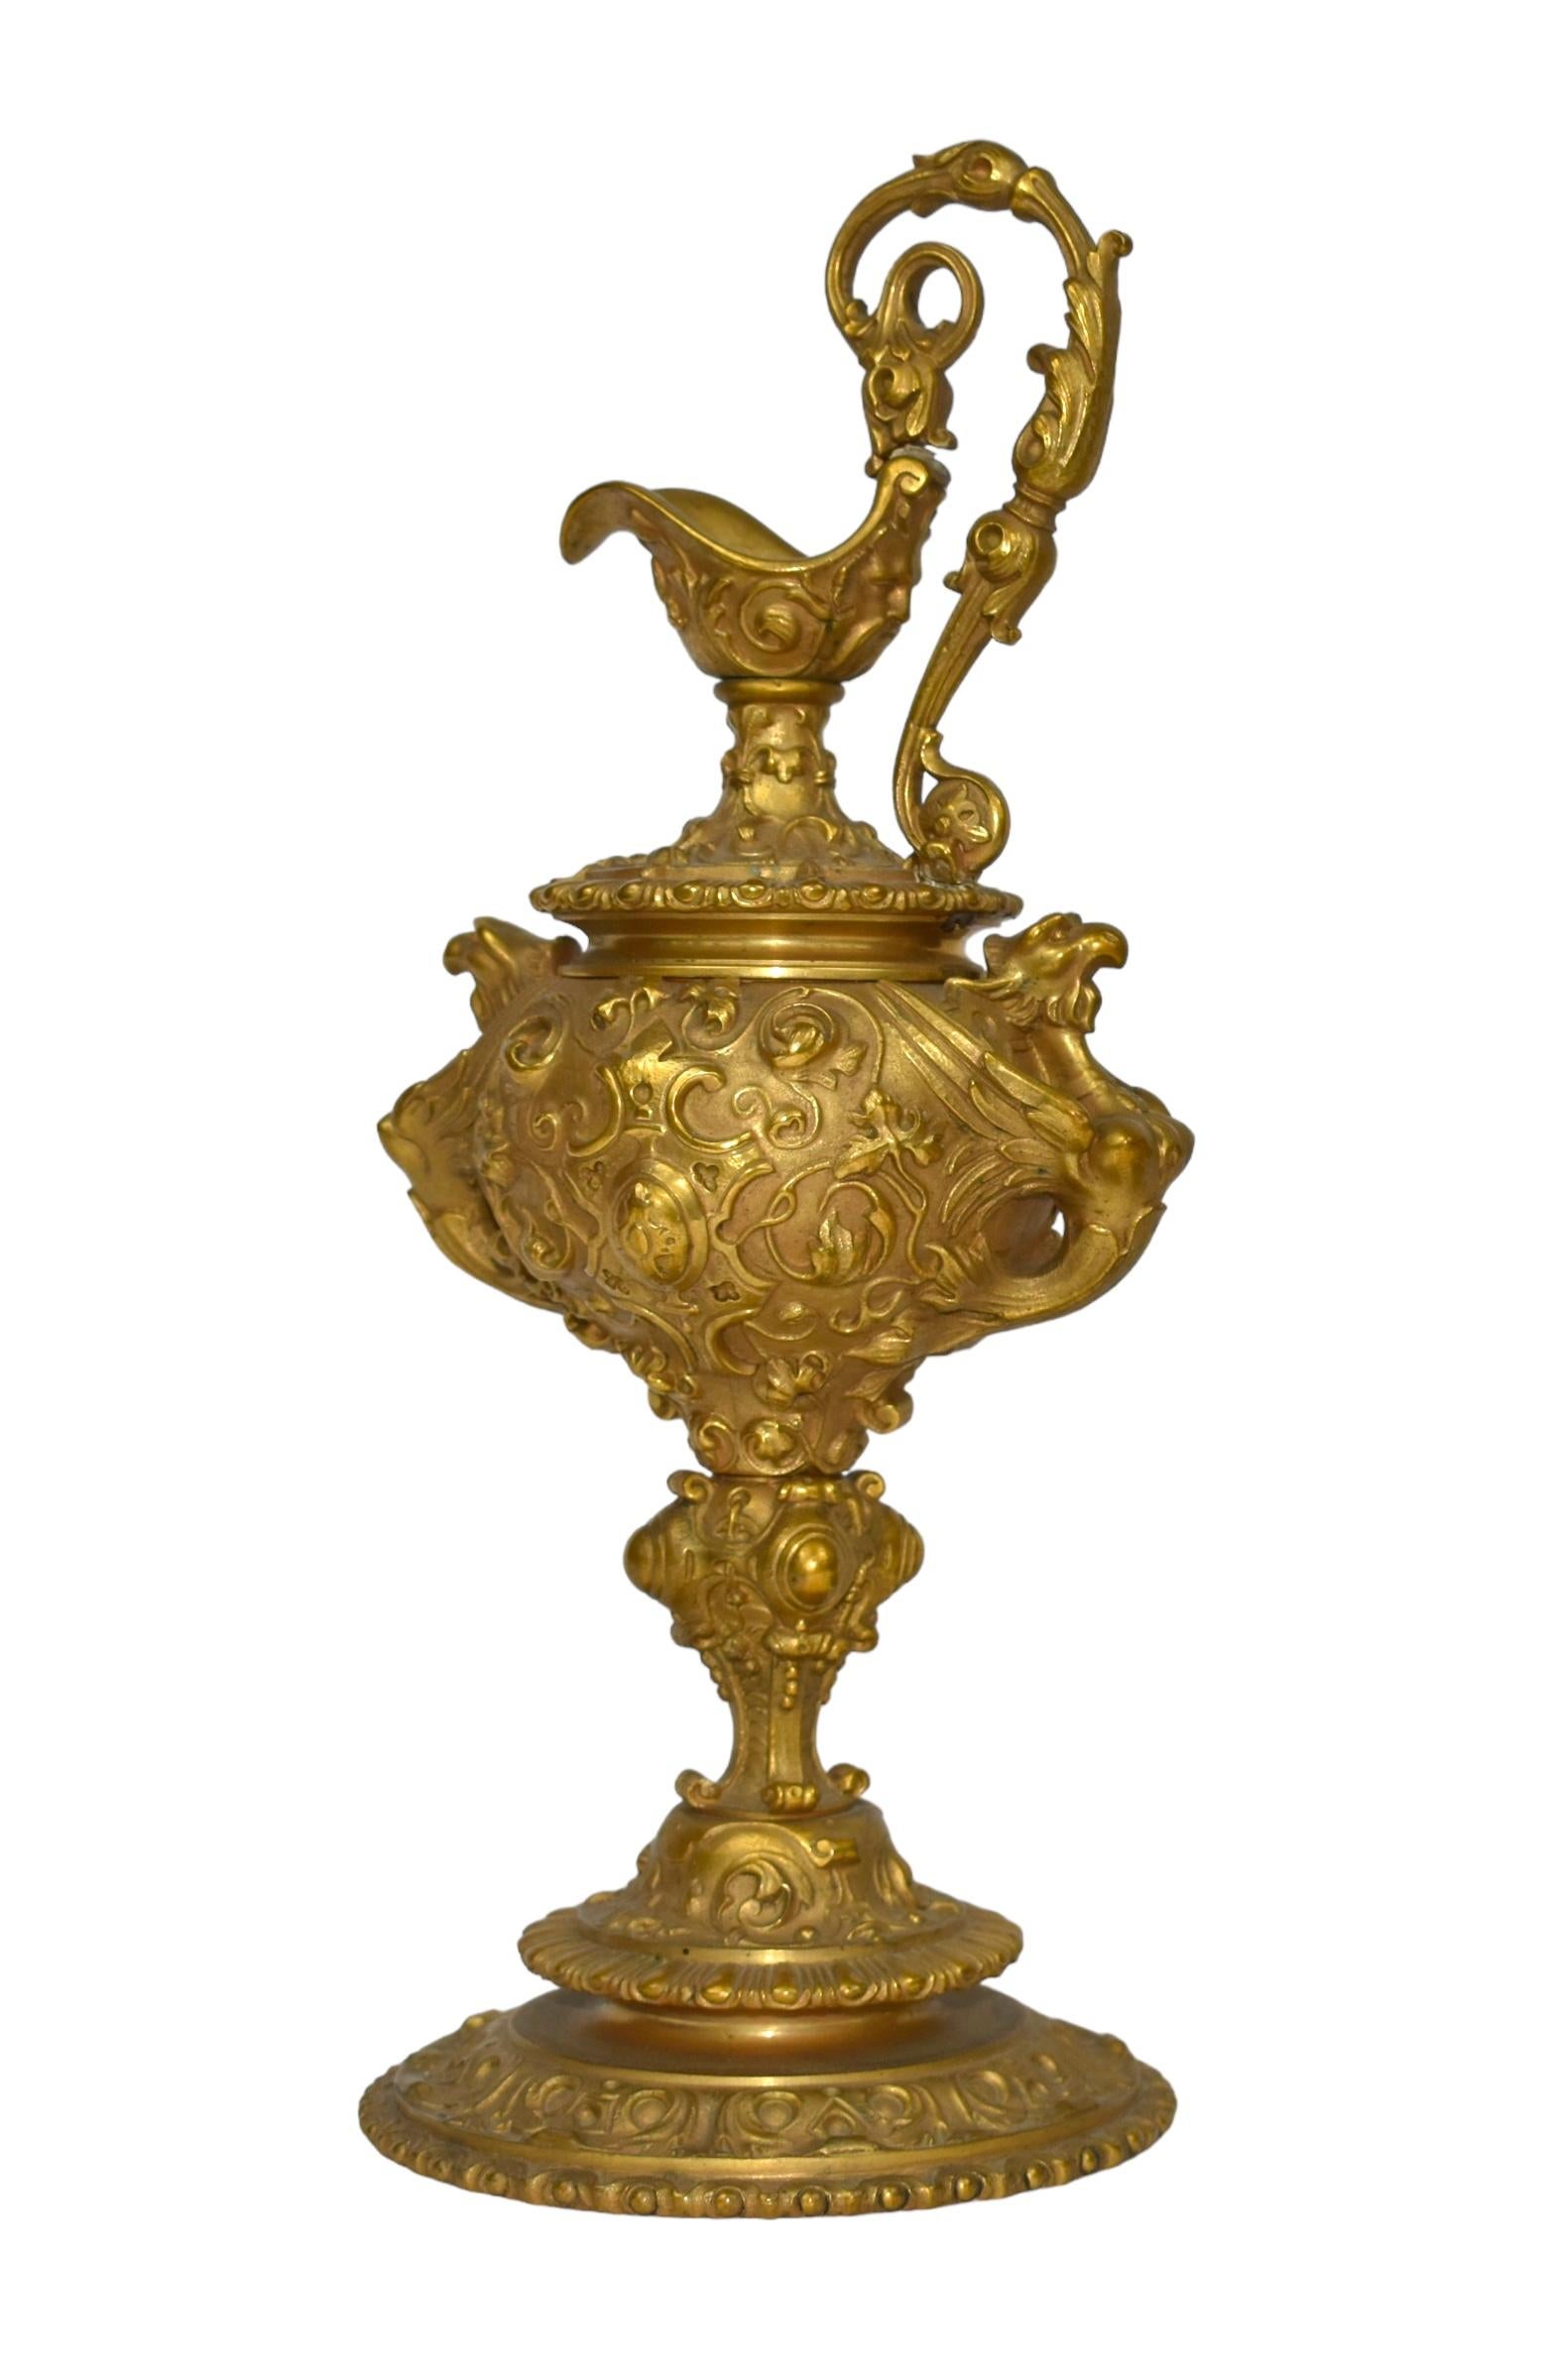 A very rare pair of antique French neo-classical gilded bronze ewer vases from the 19th century.

These ewers, created in the mid-19th century, are wonderful examples of the revival of interest in the Renaissance art form during that time

Amazing